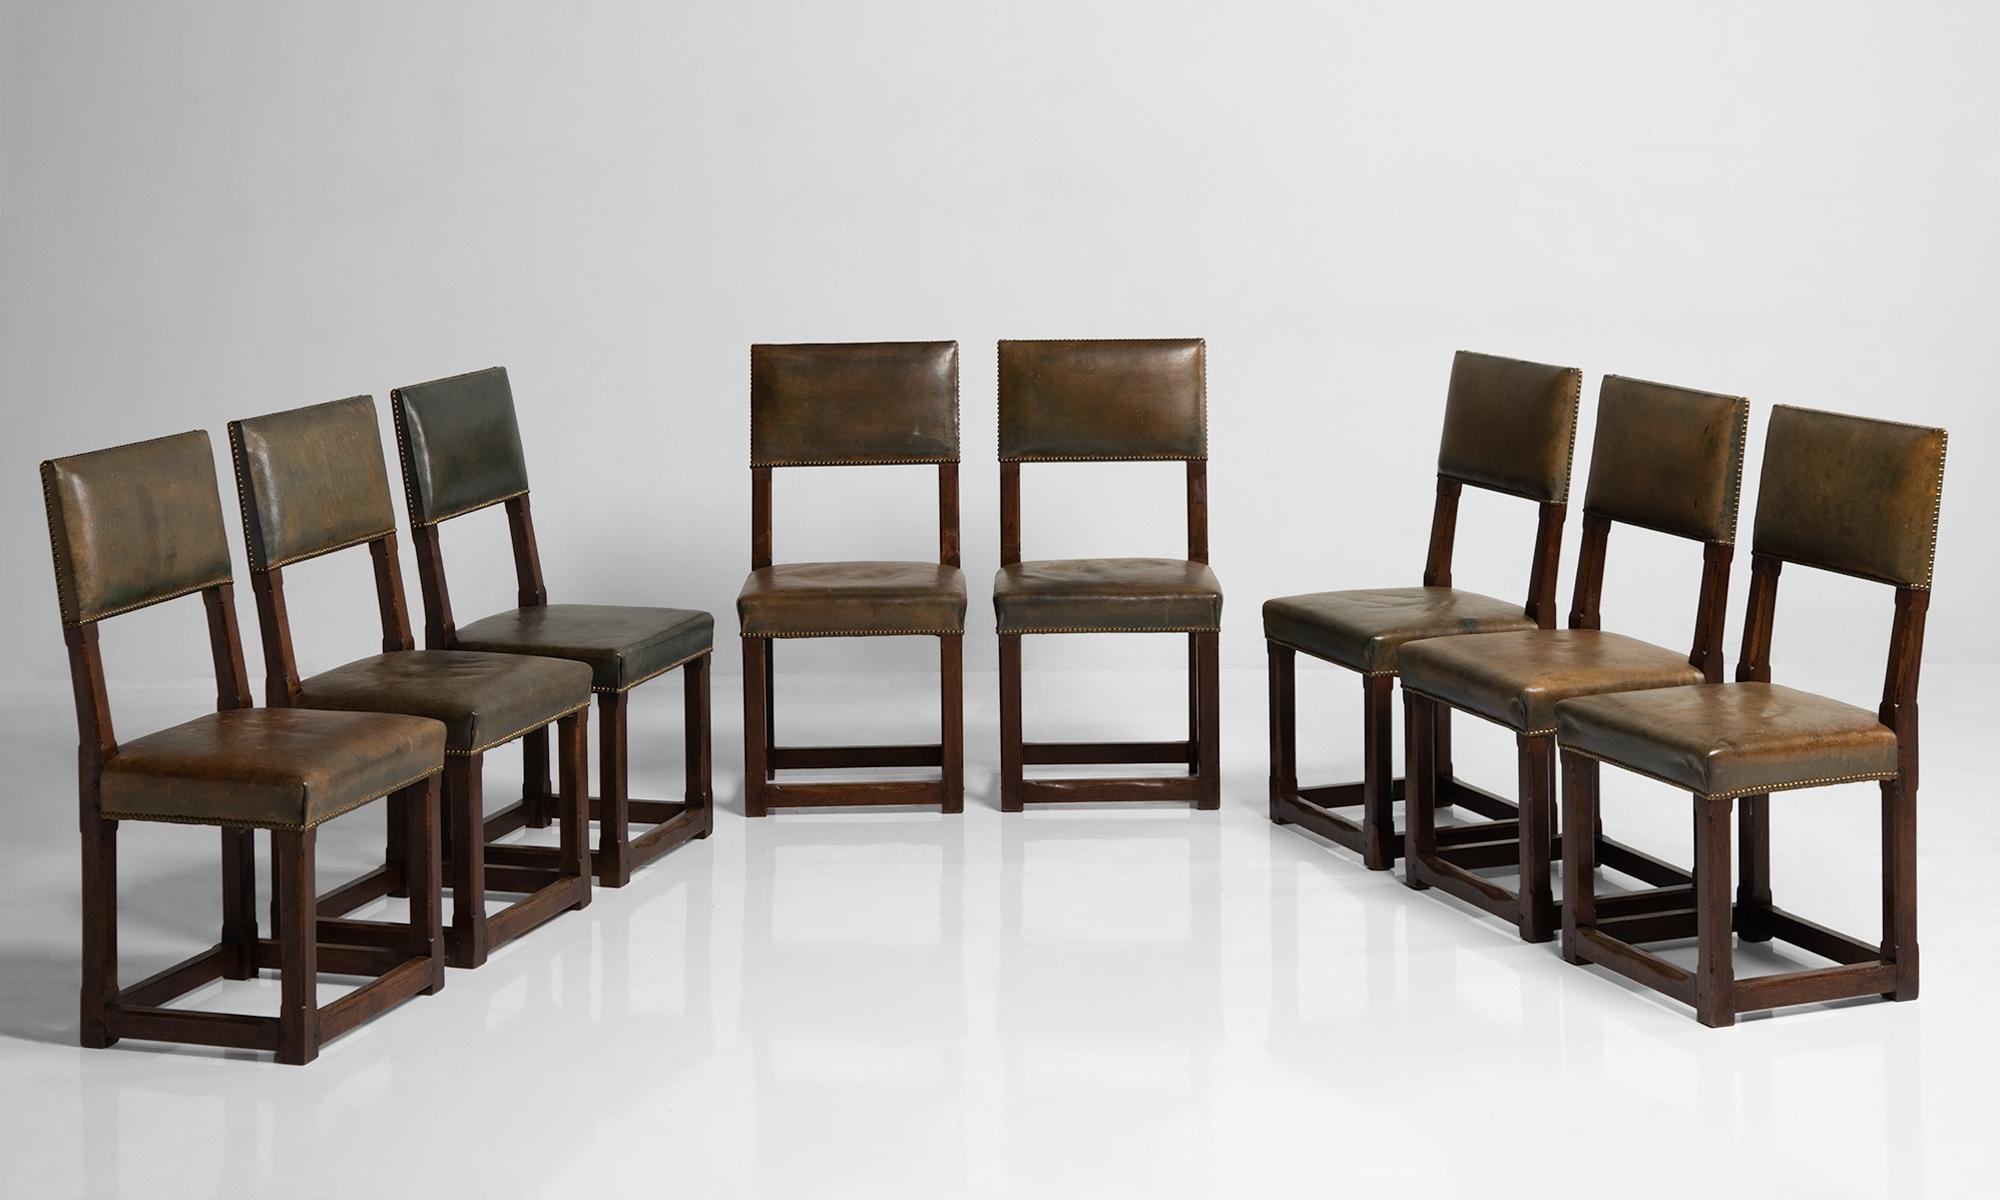 Set of twelve gothic oak dining chairs, England, circa 1880.

Oak frame with leather seat and back. Designed in the manner of Pugin, and originally used in the House of commons.

